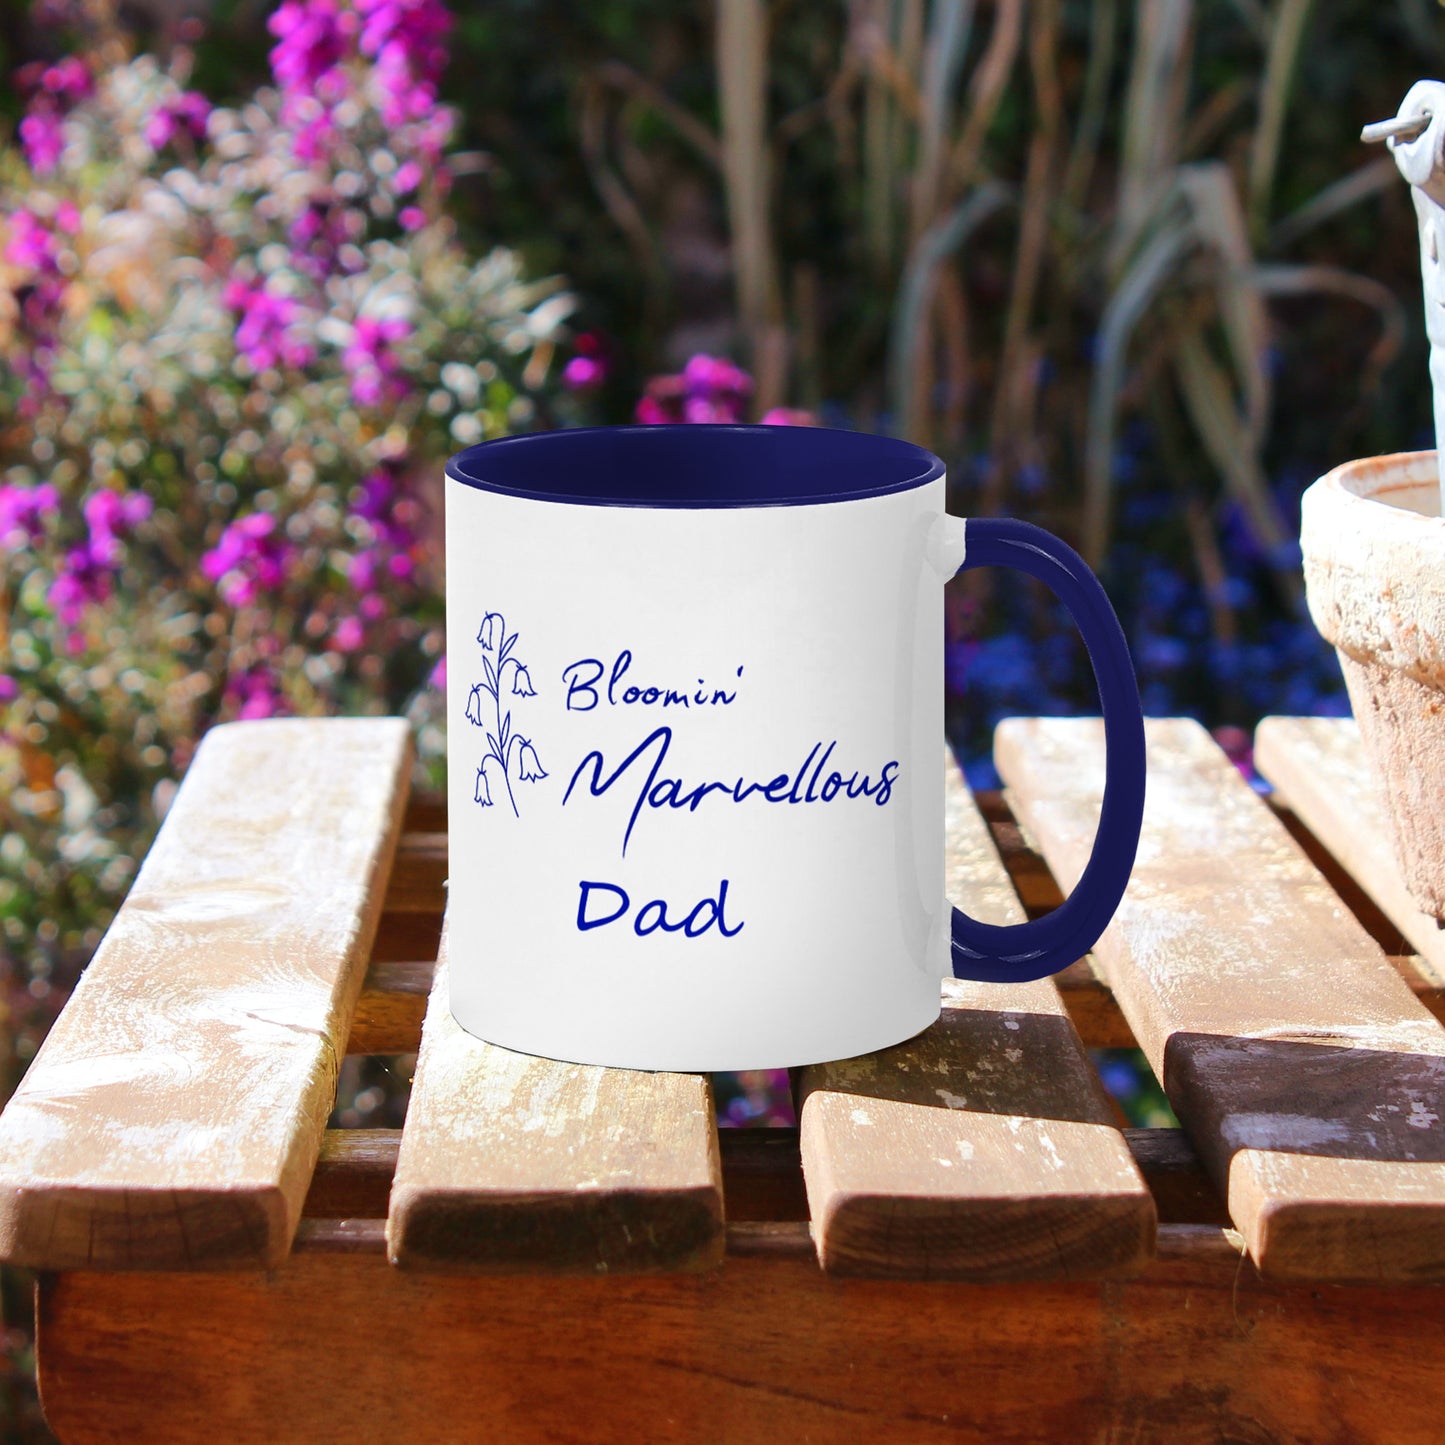 Garden plant theme mug. Personalised name, White ceramic 11oz coffee cup with navy blue handle and inner. Floral design navy blue bluebells outline and wording Bloomin Marvellous in script style font next to flowers. Personalisation Dad below.